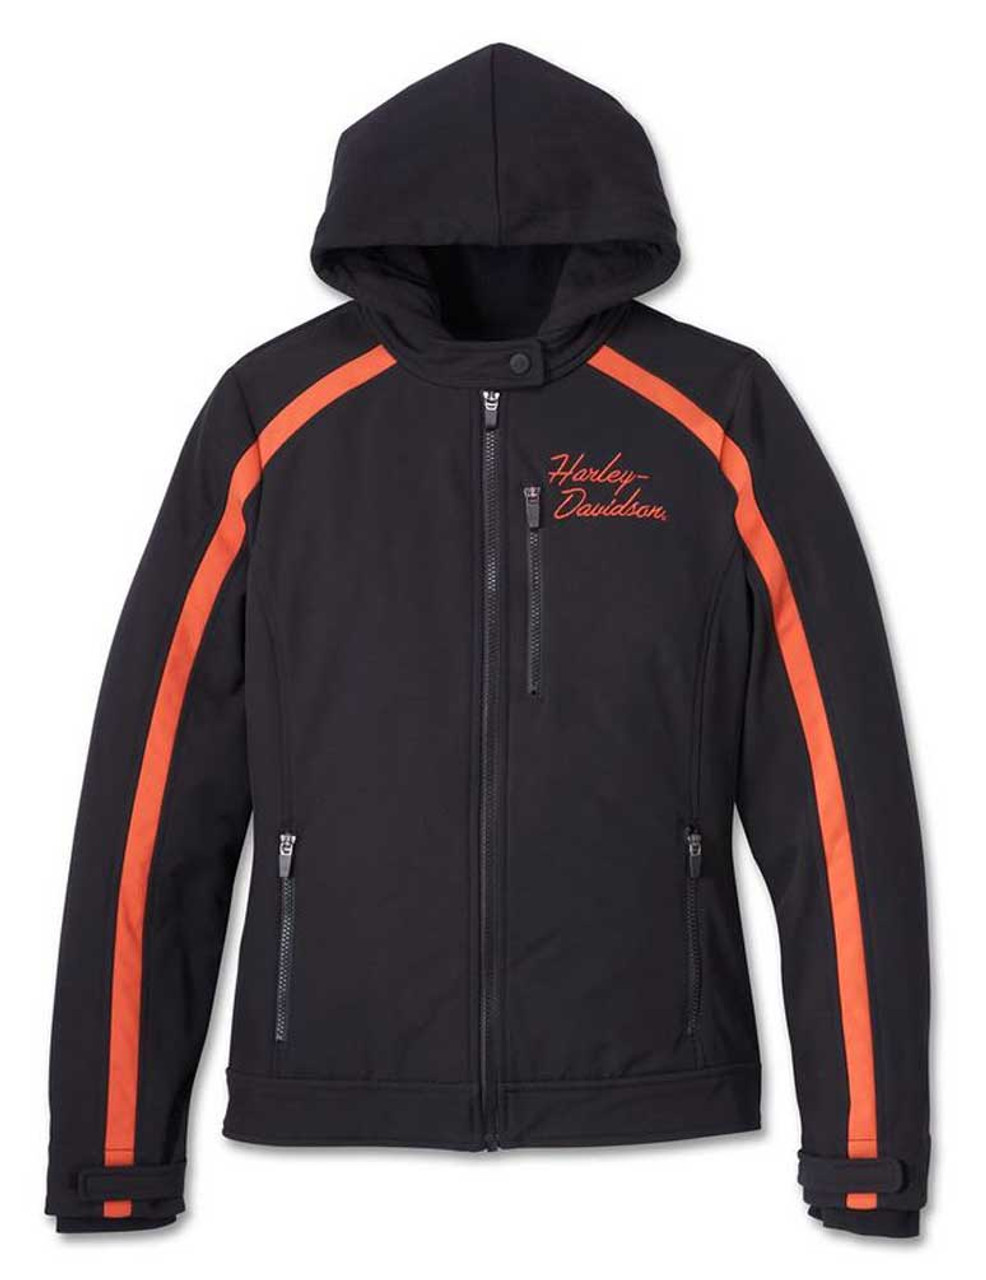 Harley-Davidson® Women's Miss Enthusiast 3-IN-1 Soft Shell Jacket 98404-23VW